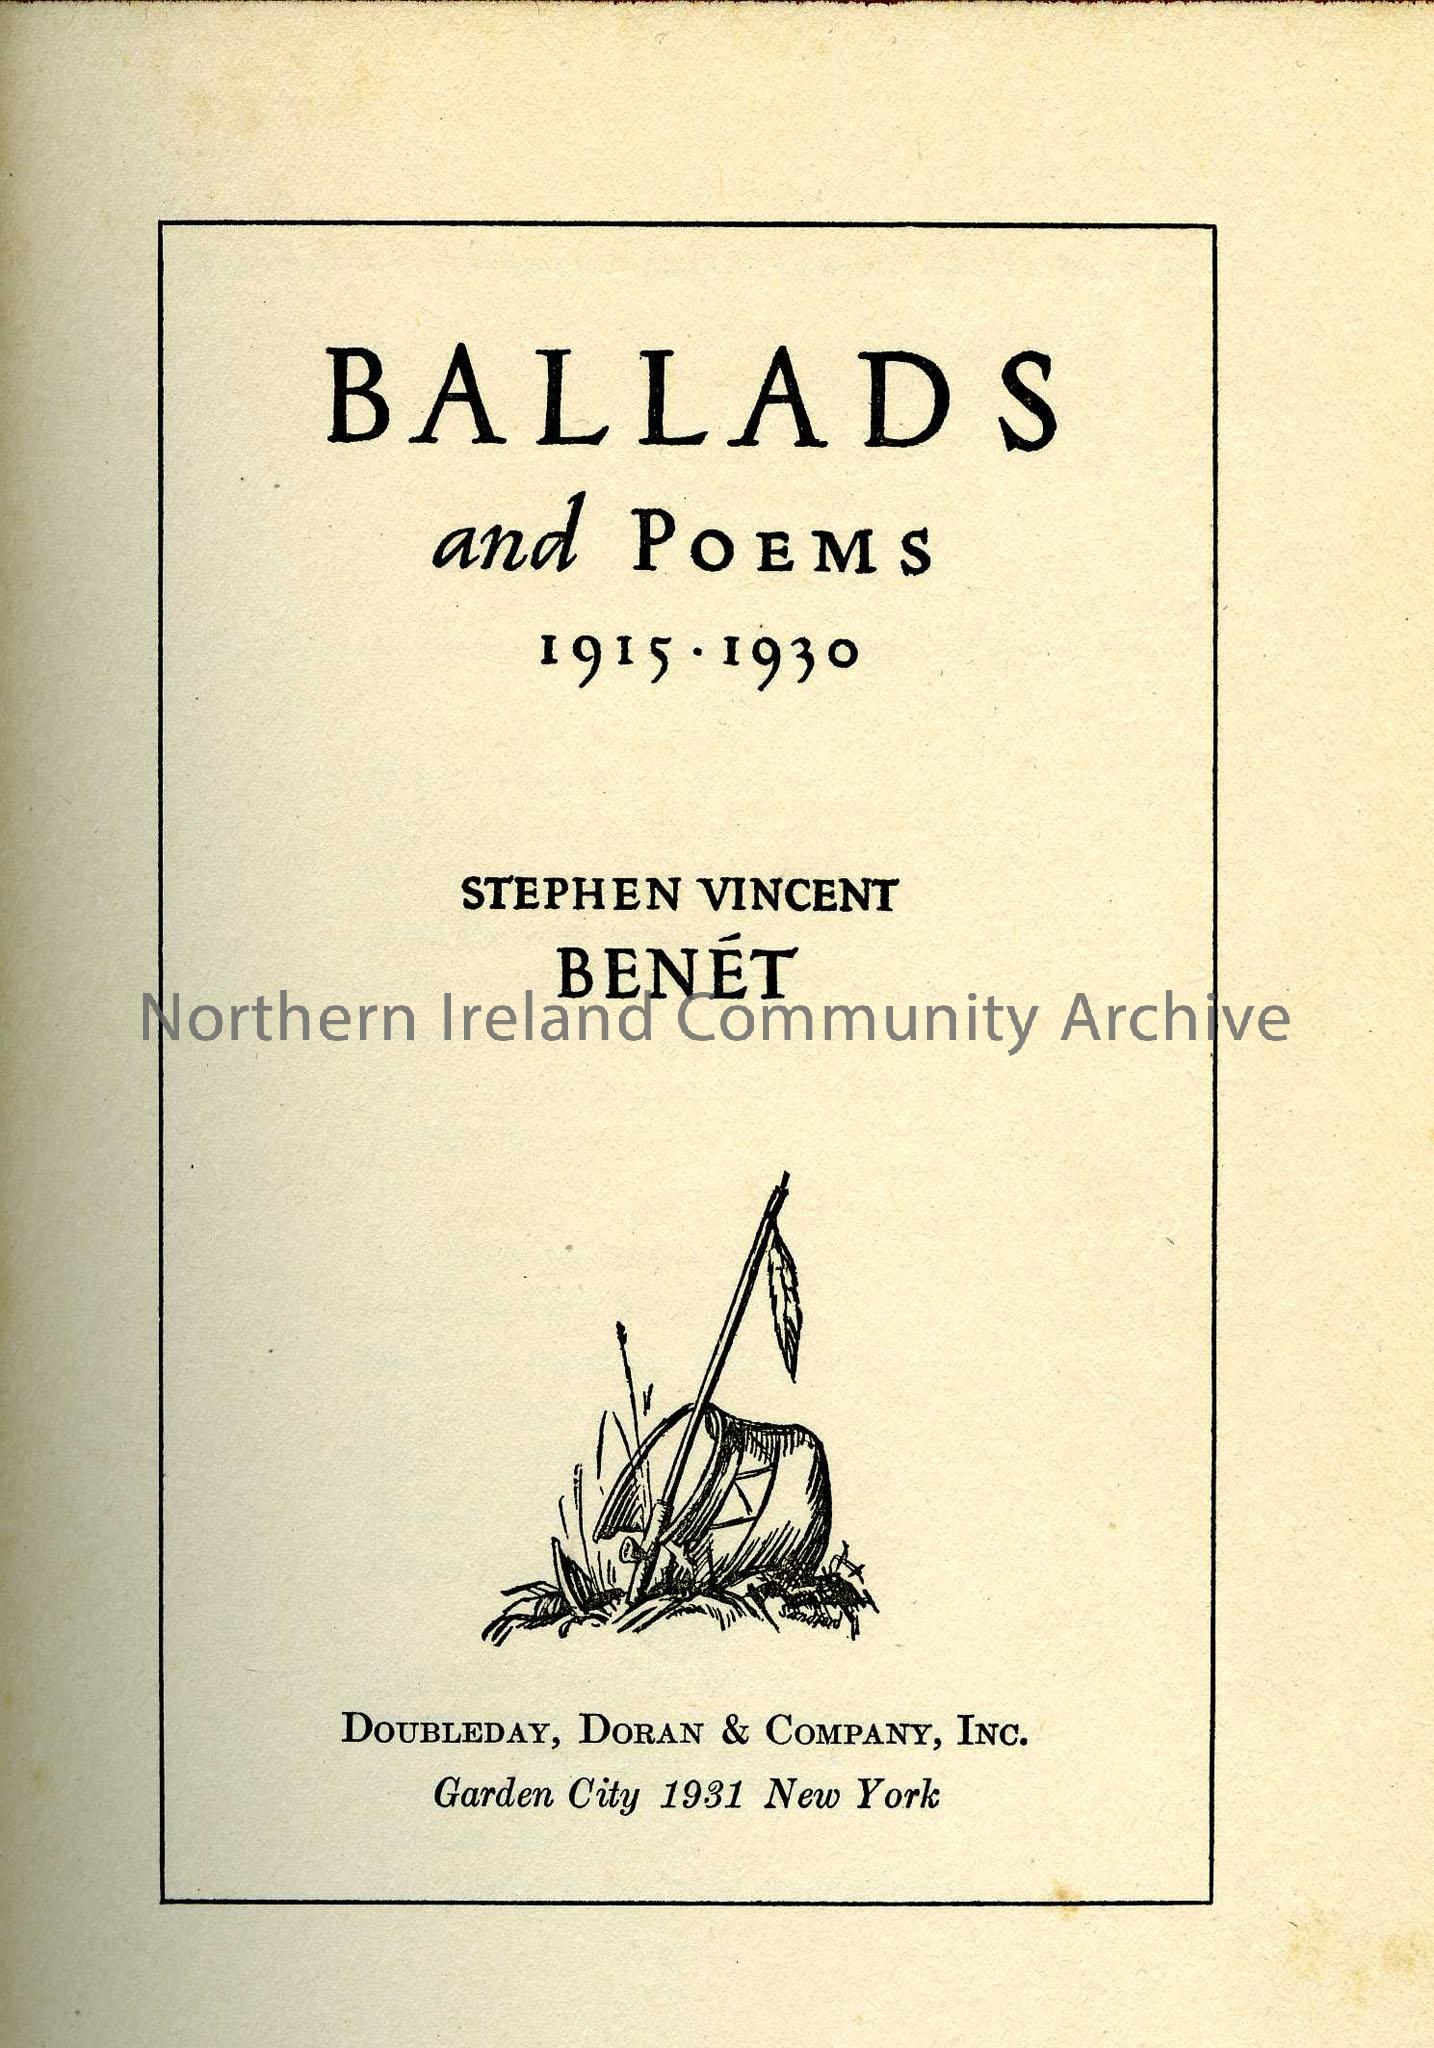 Ballads and Poems 1915-1930